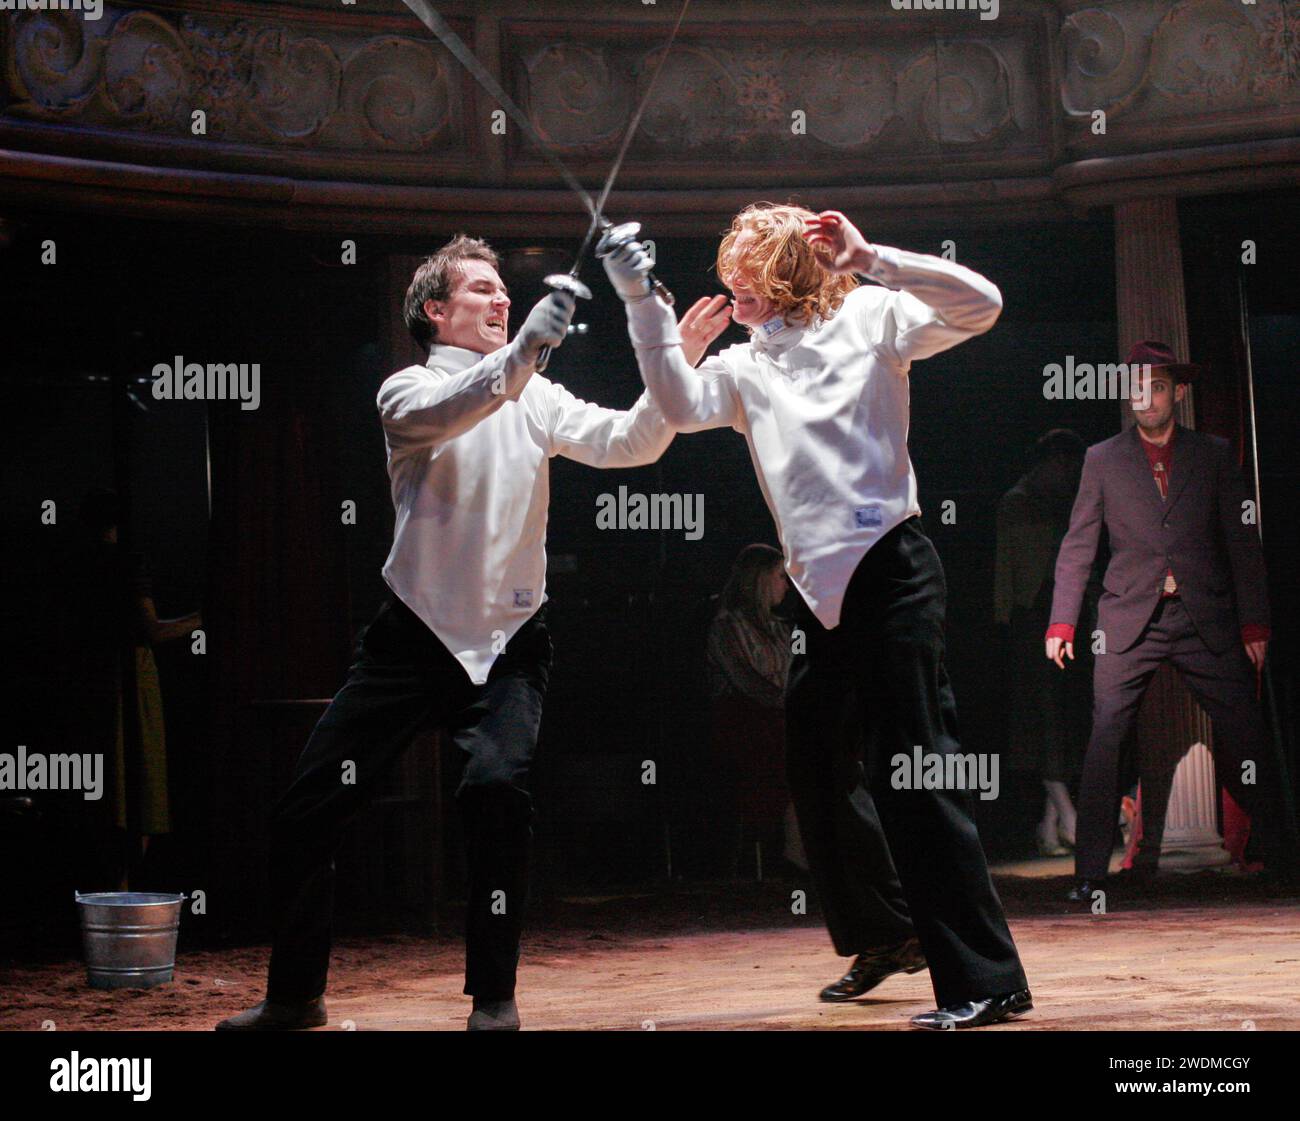 duelling - l-r: Tobias Menzies (Hamlet), Michael Shaeffer (Laertes) watched by Tom Edden (Osric) in HAMLET by Shakespeare at the Royal Theatre, Northampton, England  22/03/2005  design: Laura Hopkins  lighting: Mark Jonathan  fights: Terry King  director: Rupert Goold Stock Photo